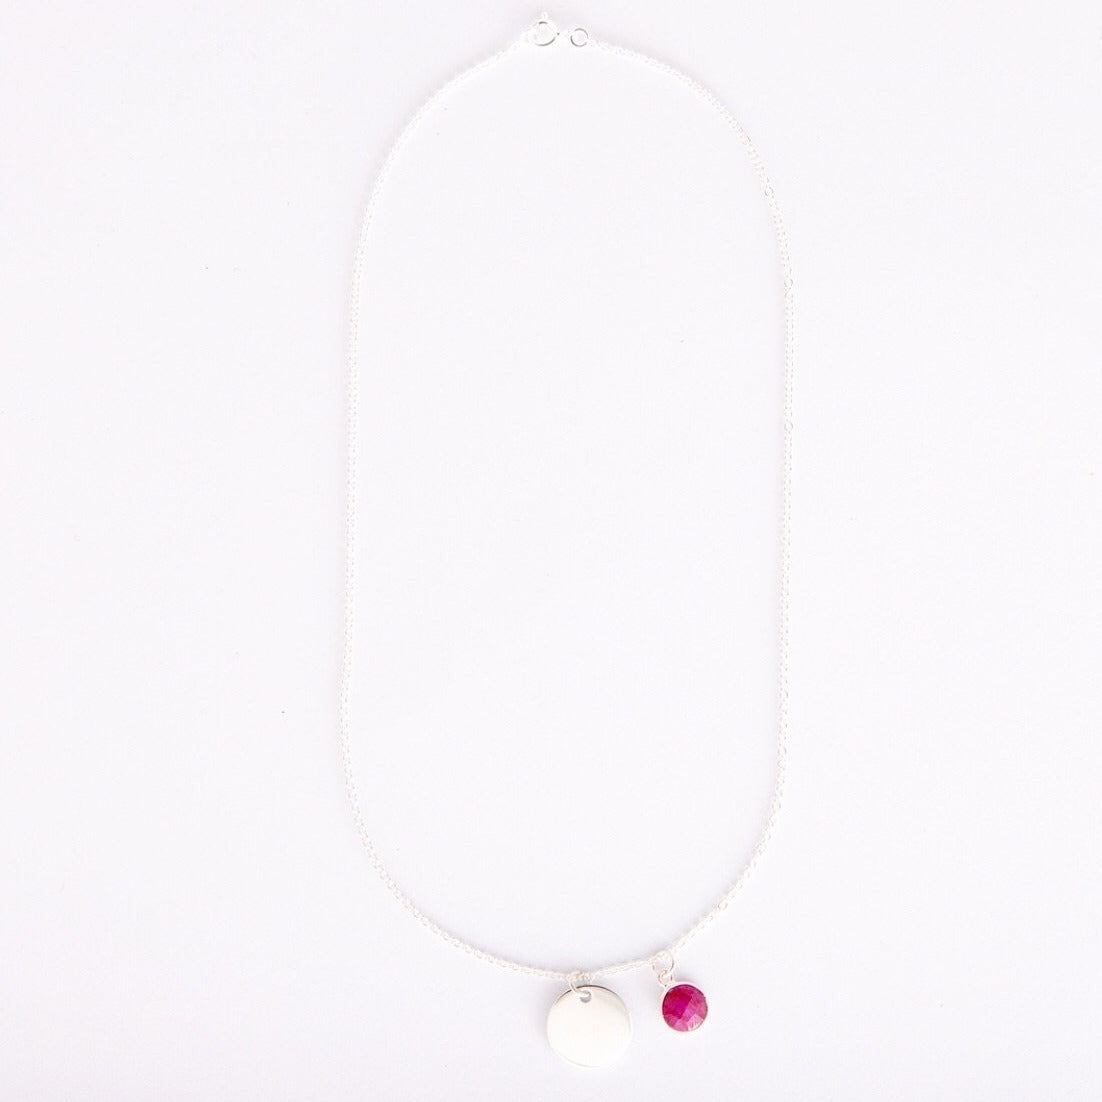 Gem and charm necklace (ruby)